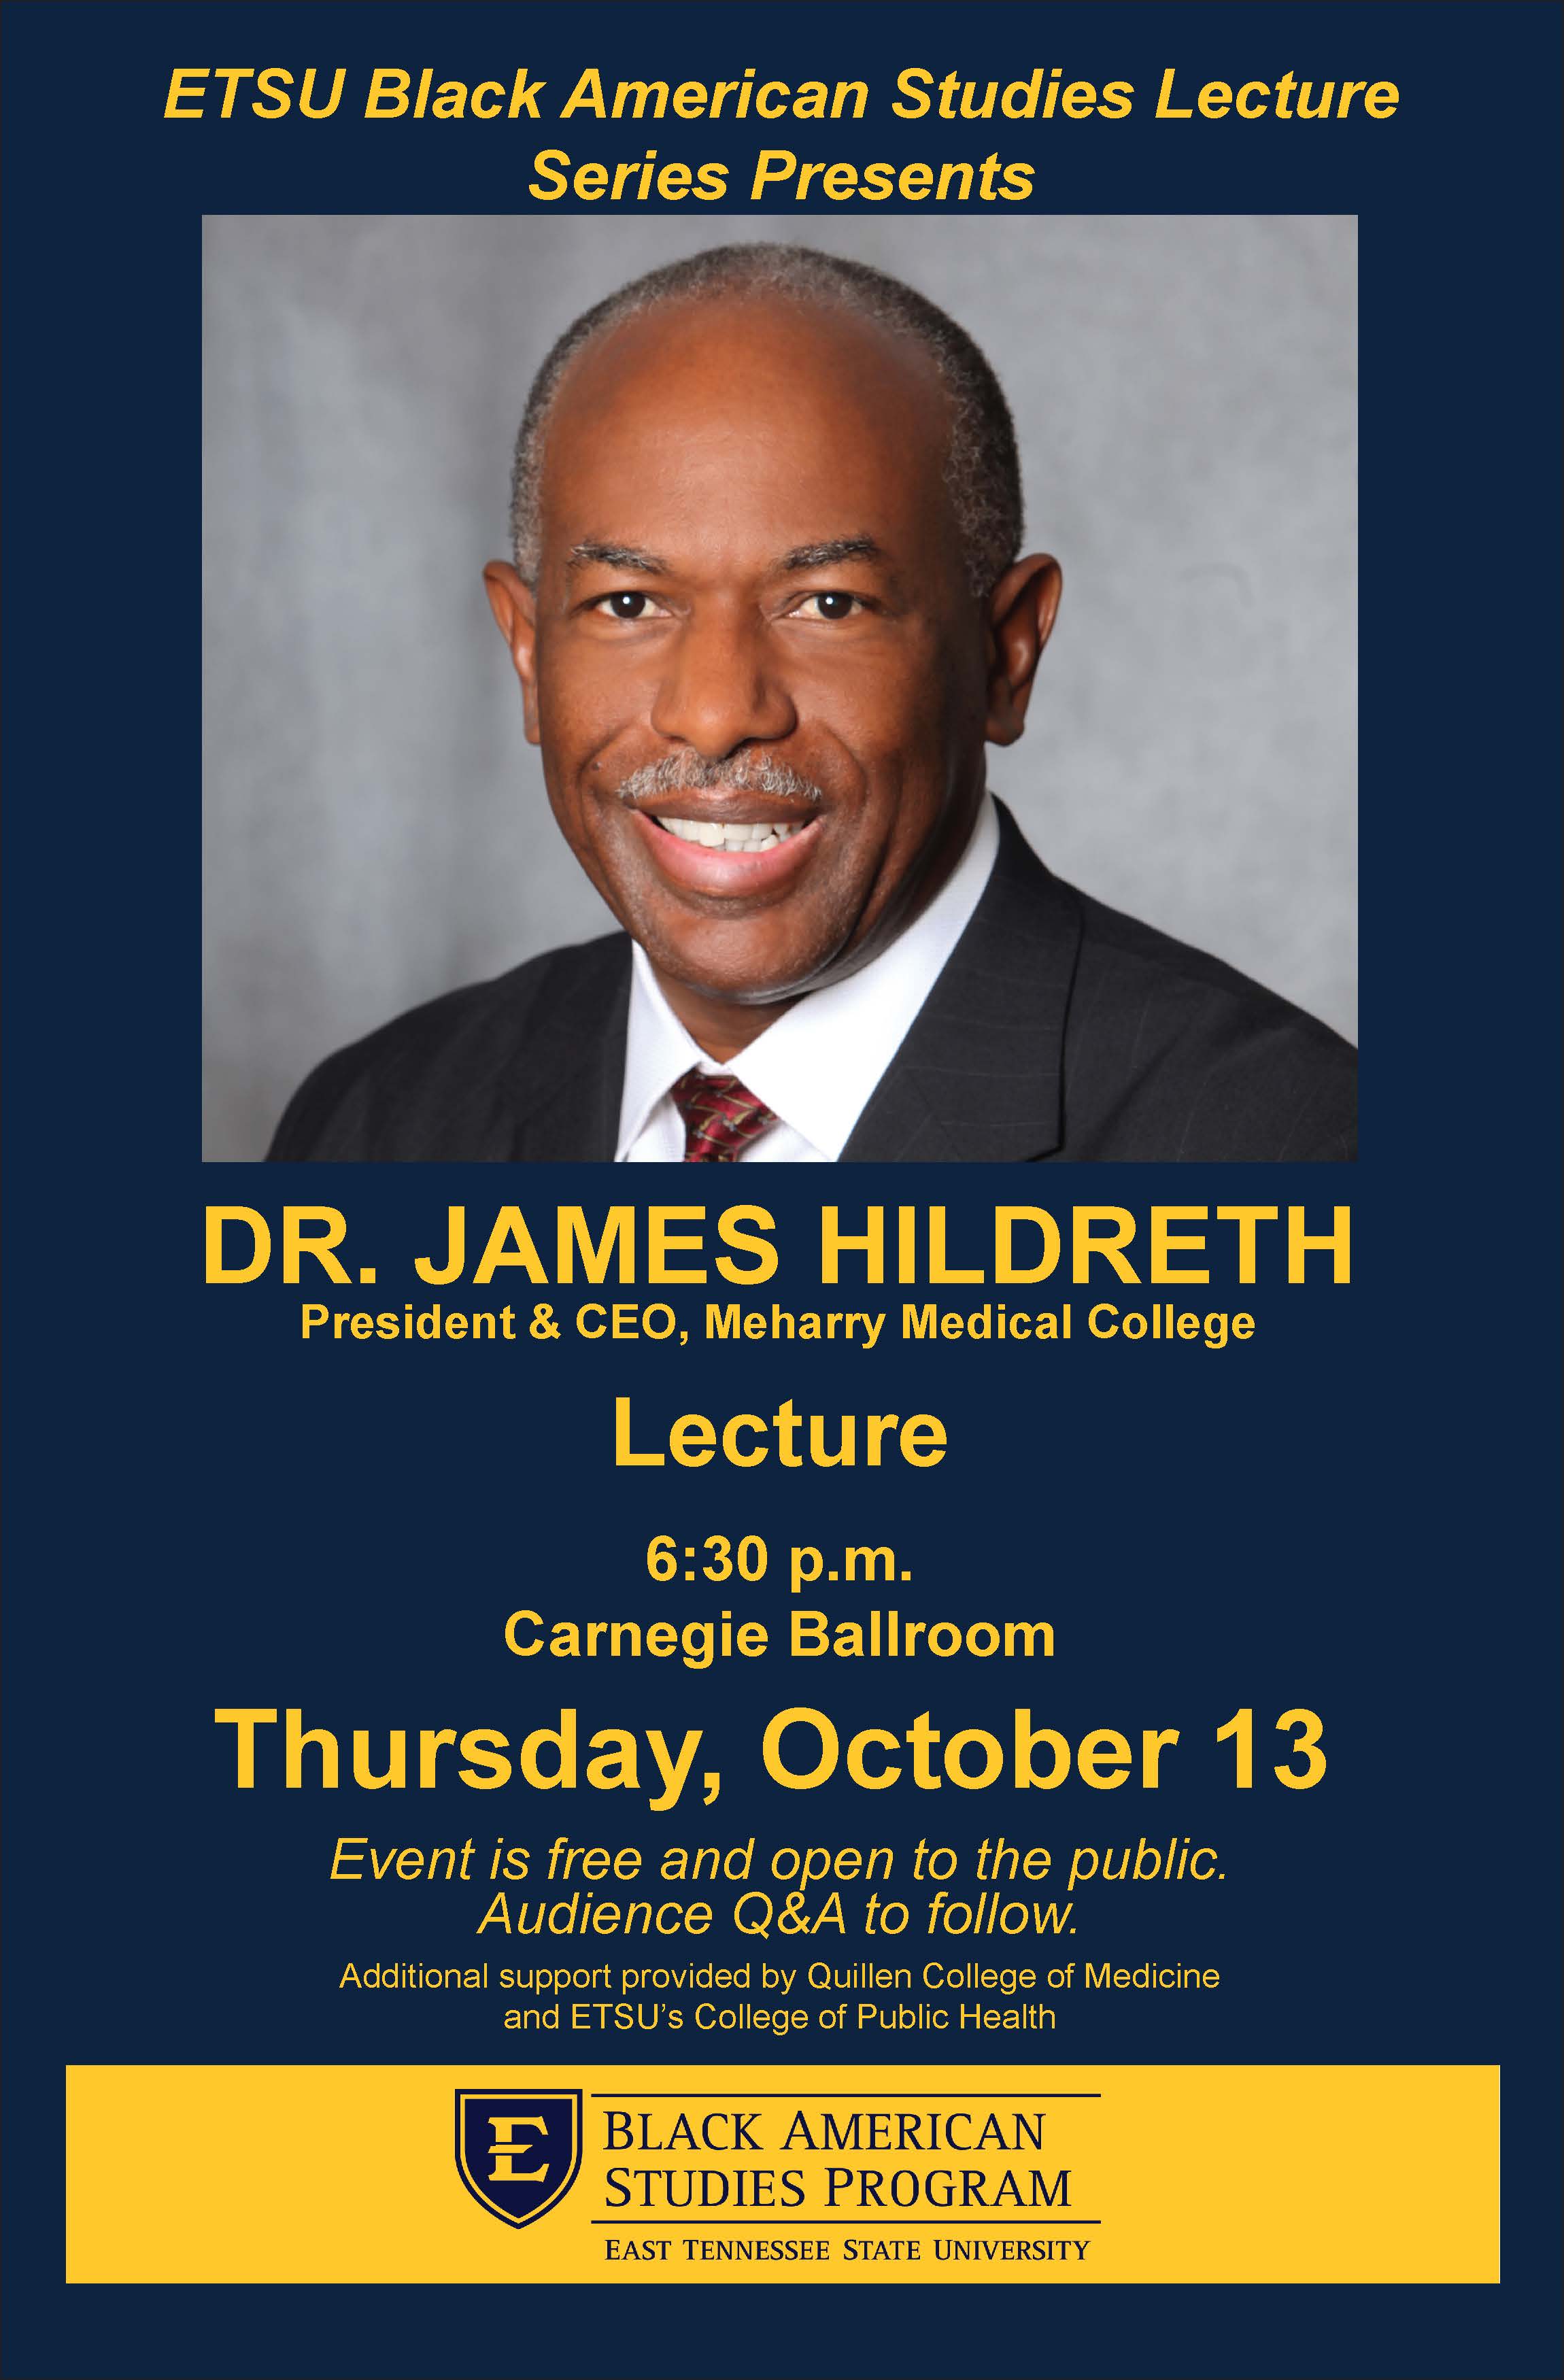 Dr. James Hildreth Poster with event information detailed in the commentary above.